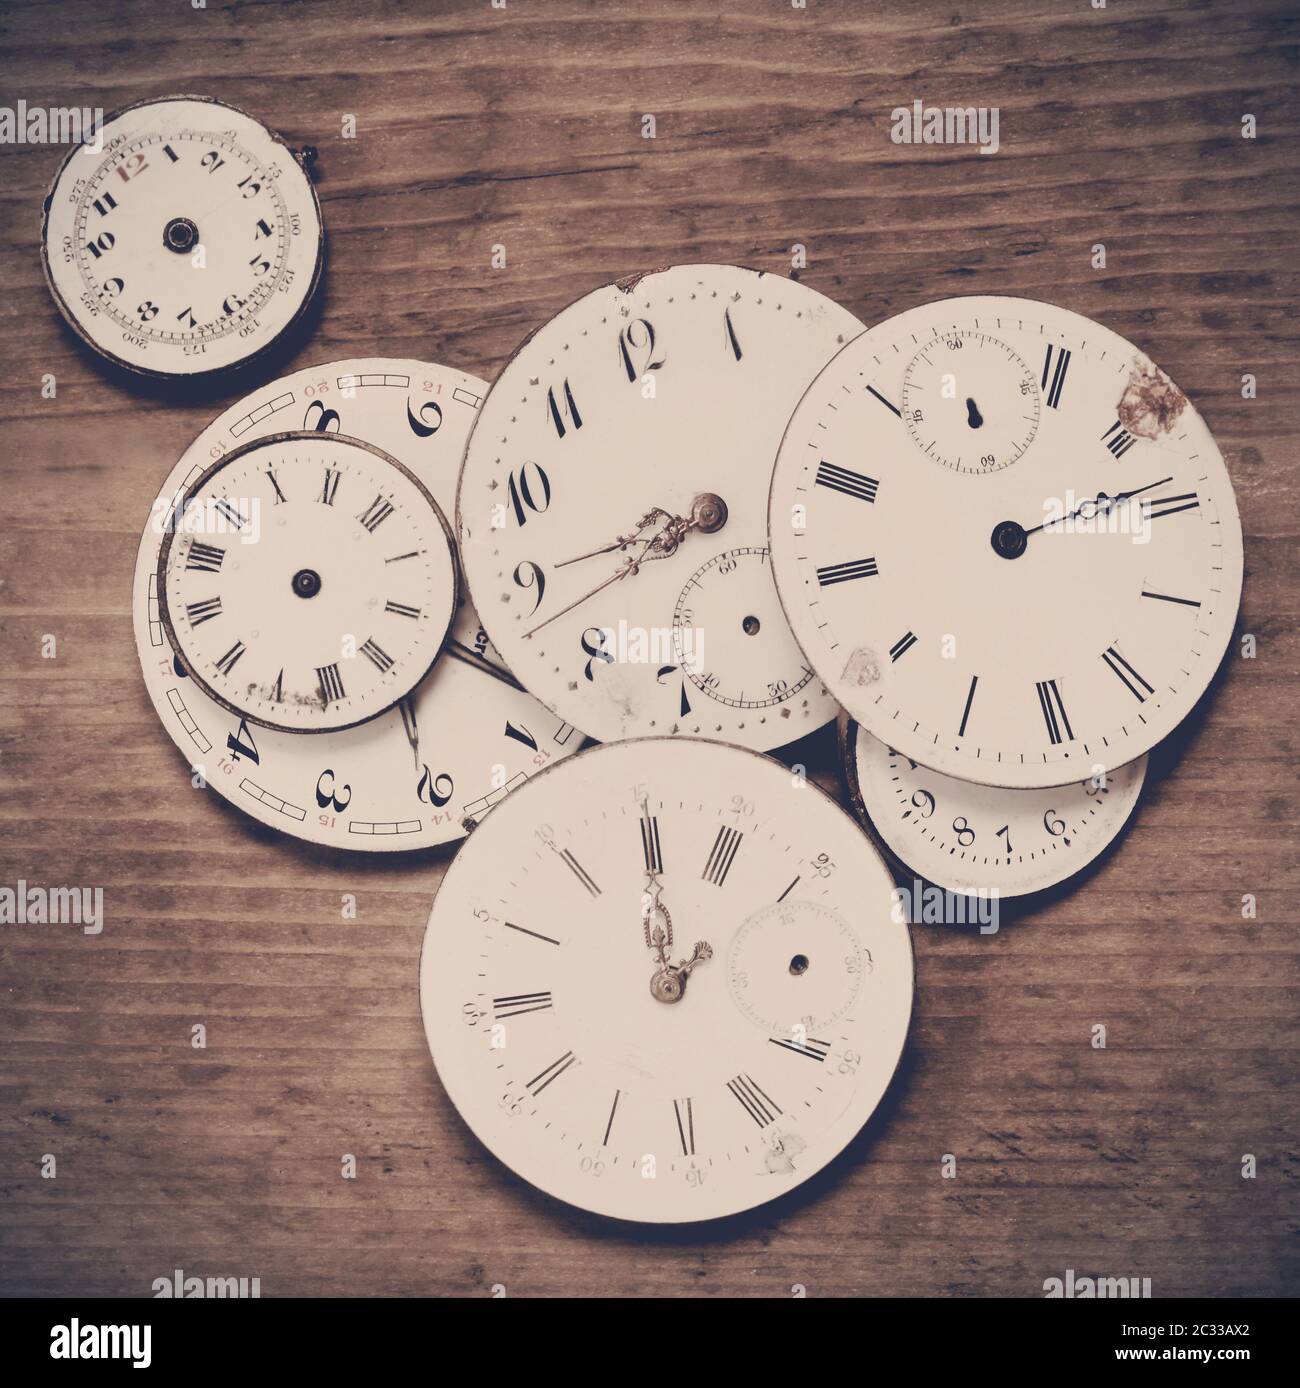 Mechanical Watches On A Wooden Background Stock Photo